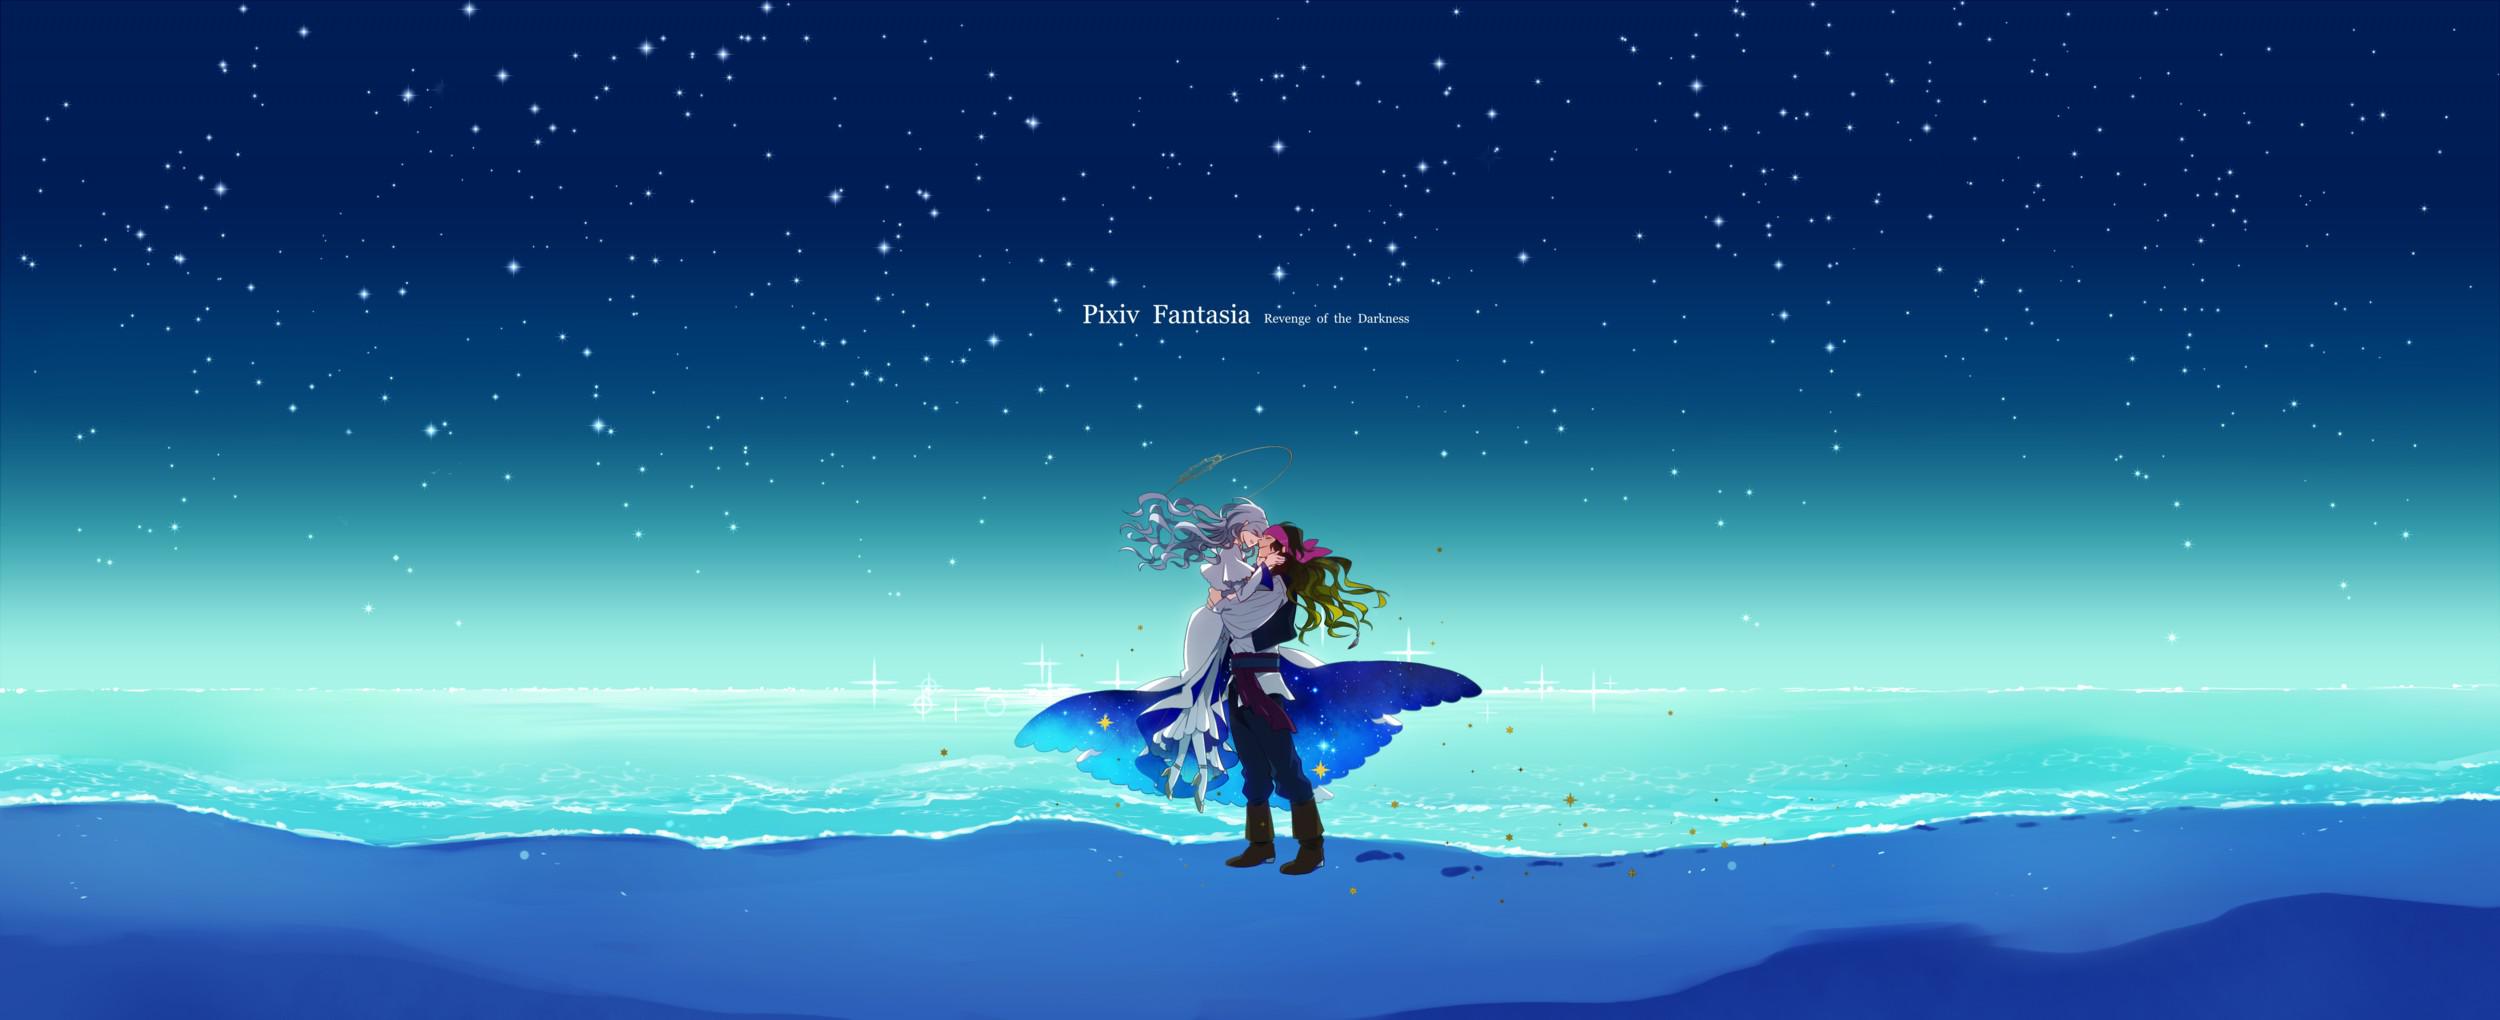 【PFRD】When I wish upon a star